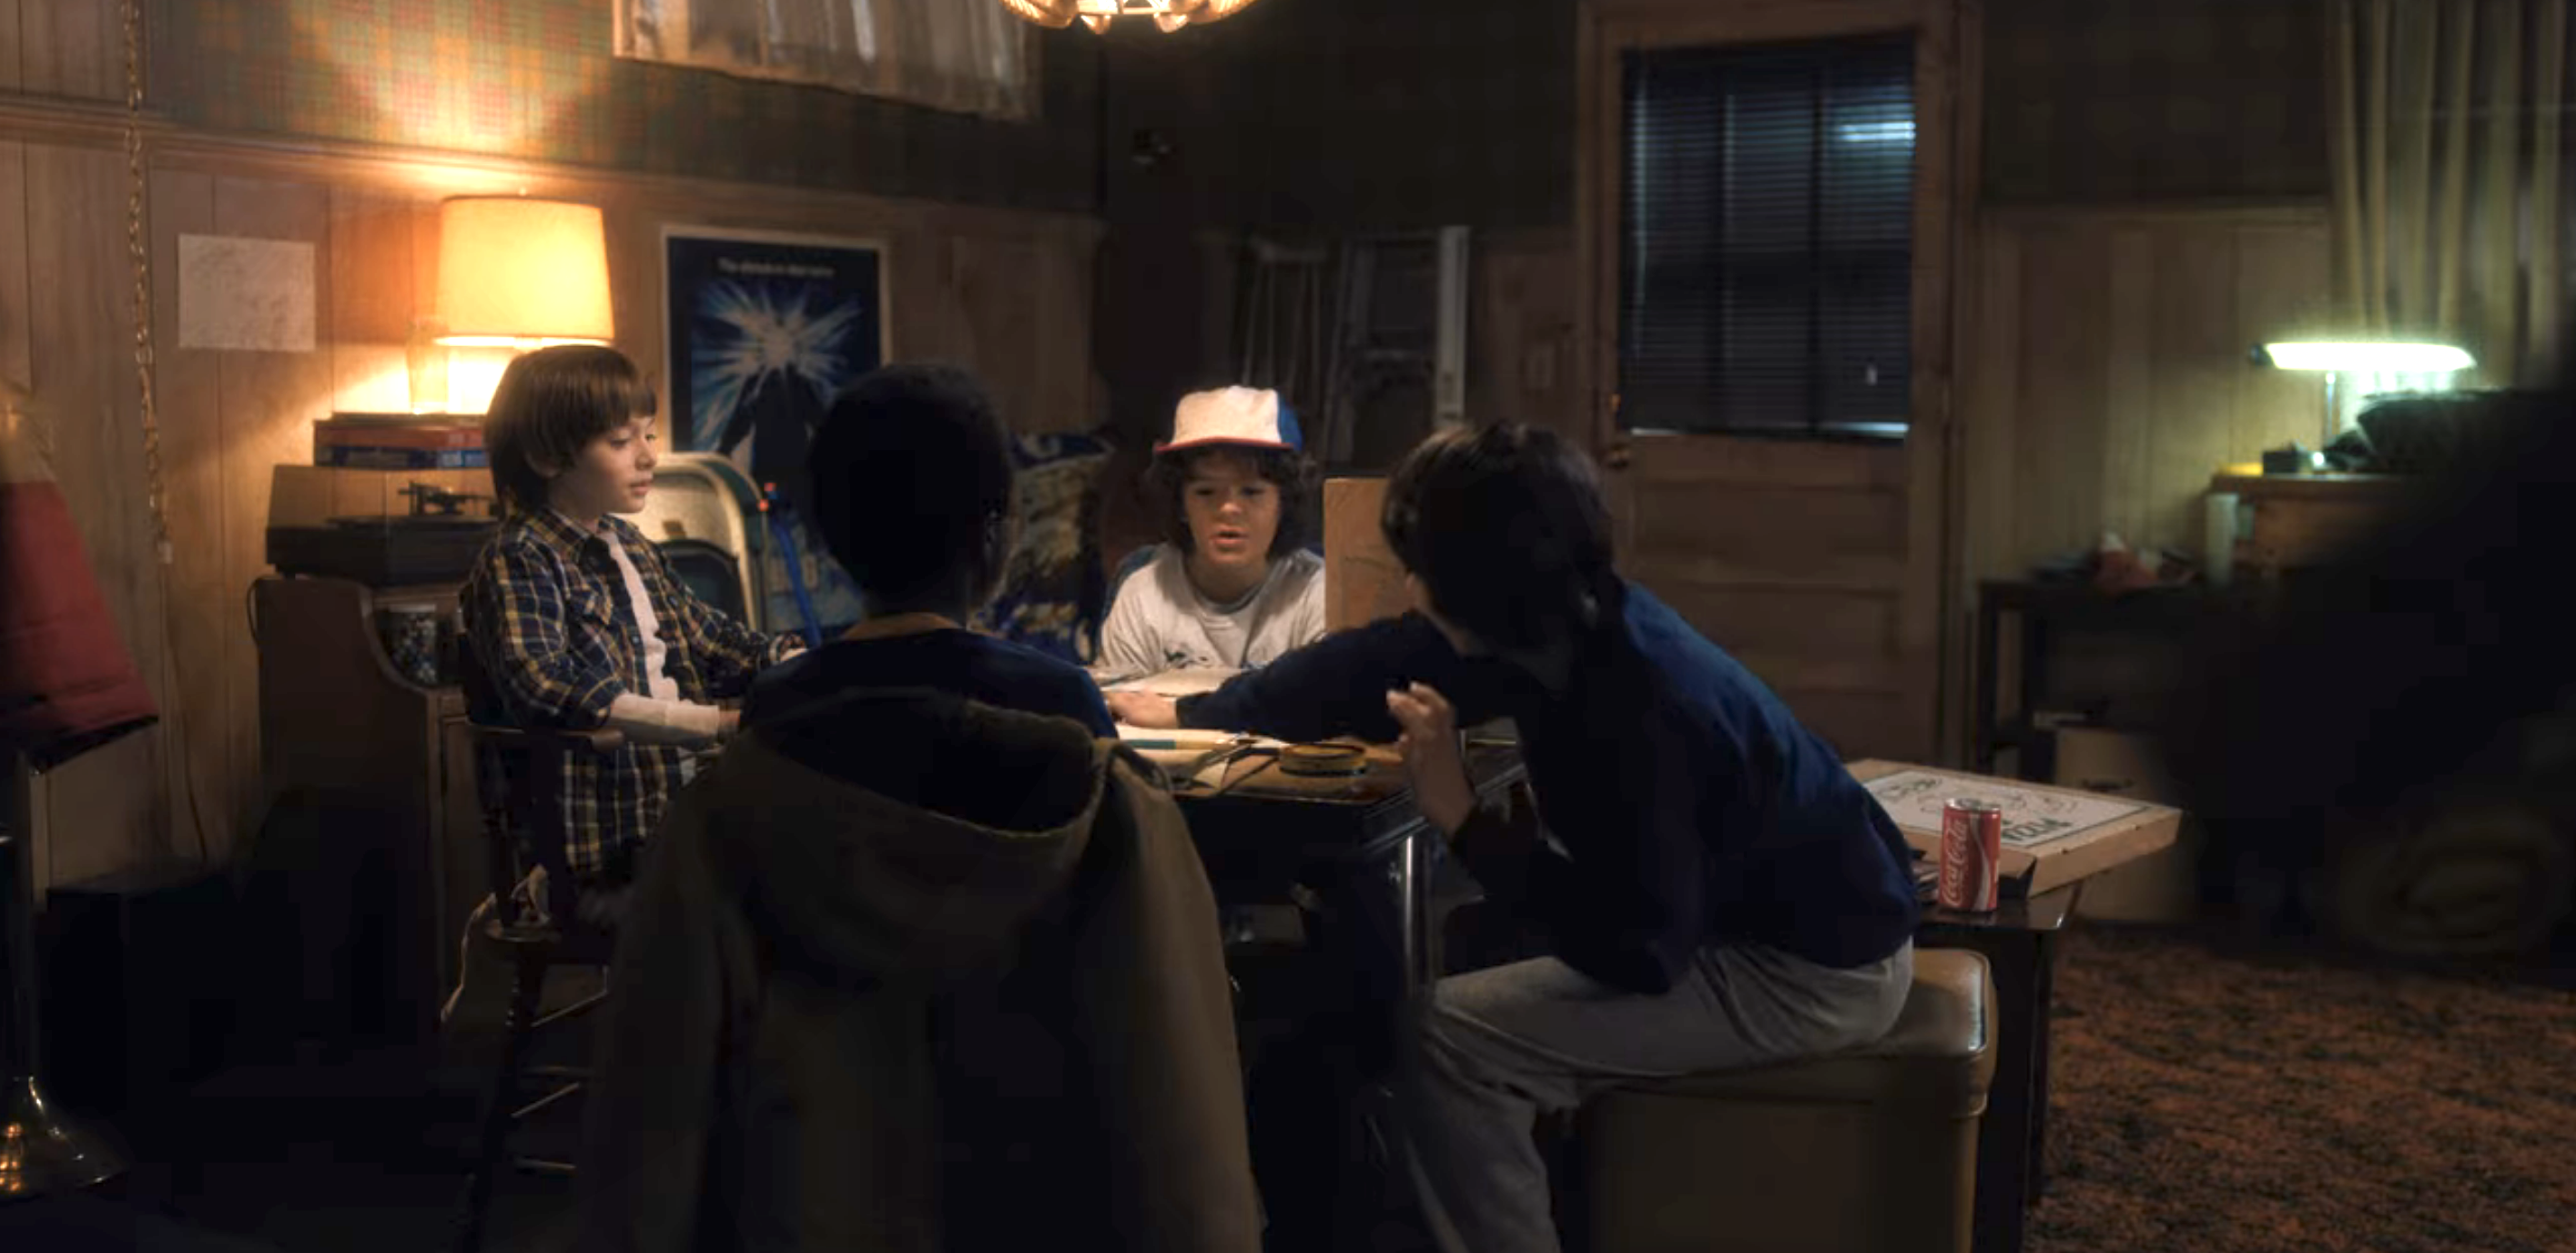 the kids sitting at a table